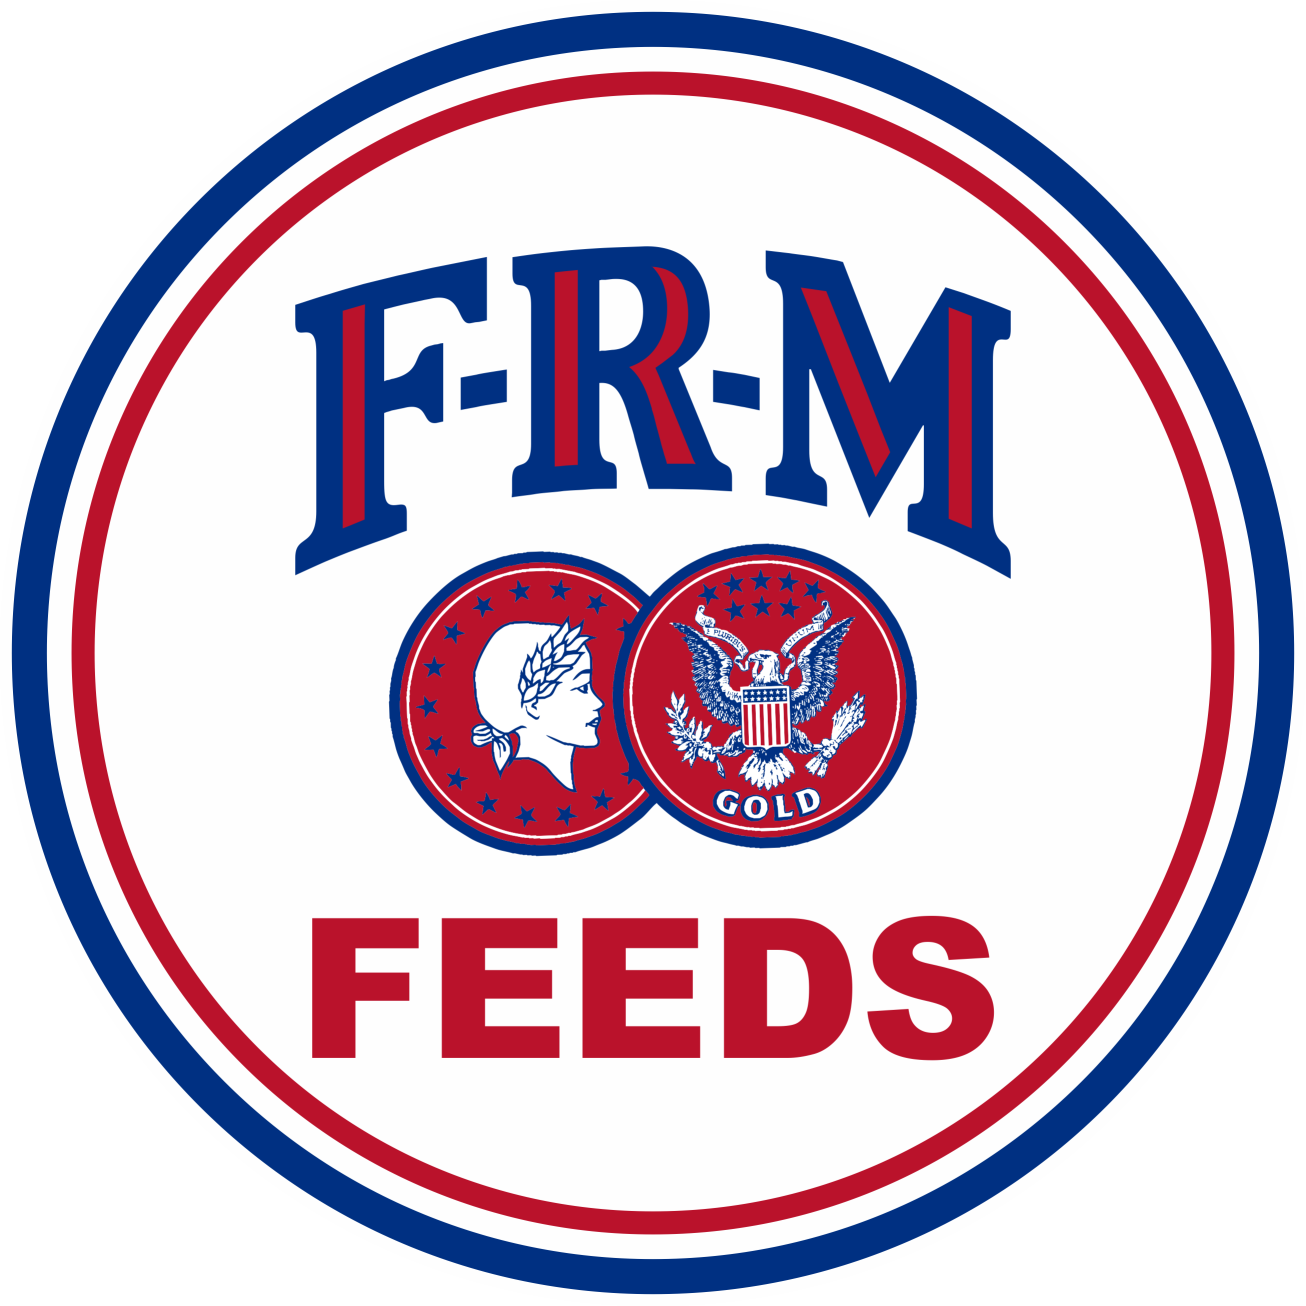 Local, High Quality Animal Feeds & Supplements - Flint River Mills, Inc.